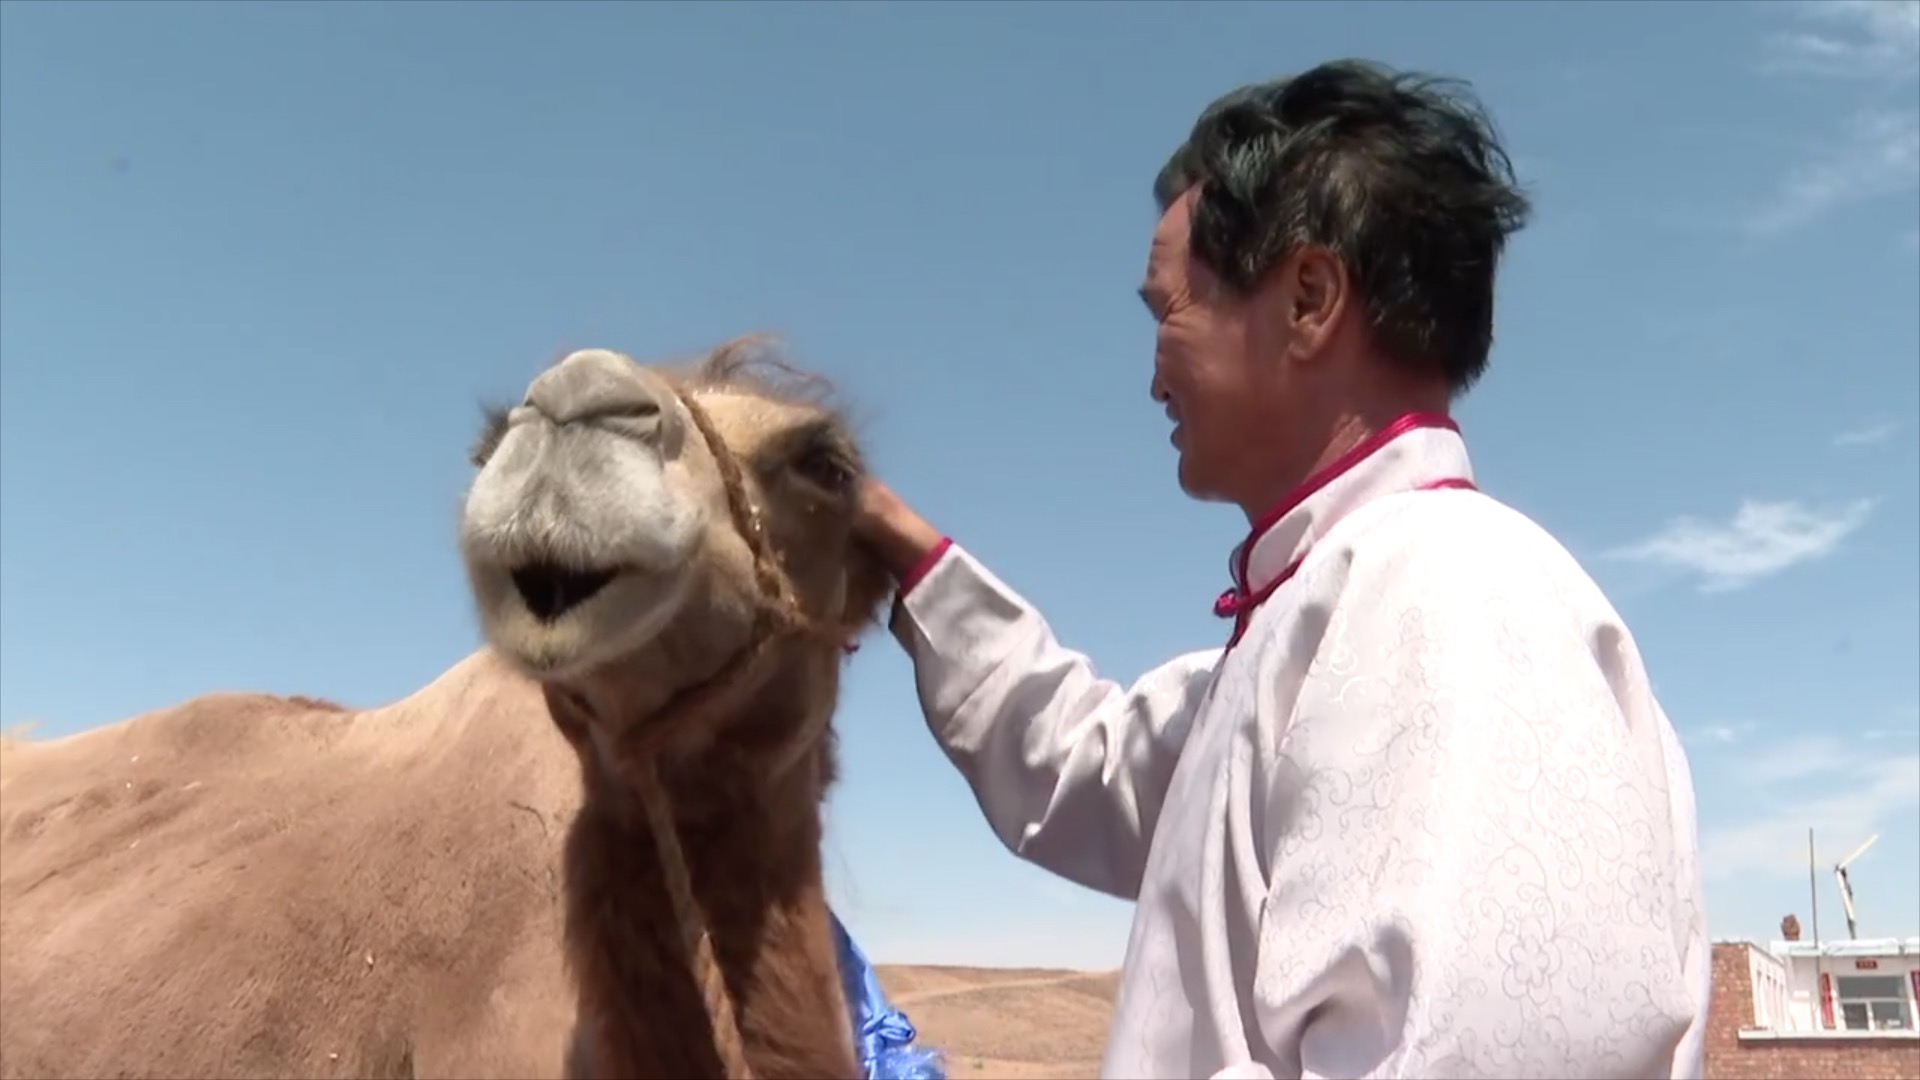 An owner is patting the head of its camel